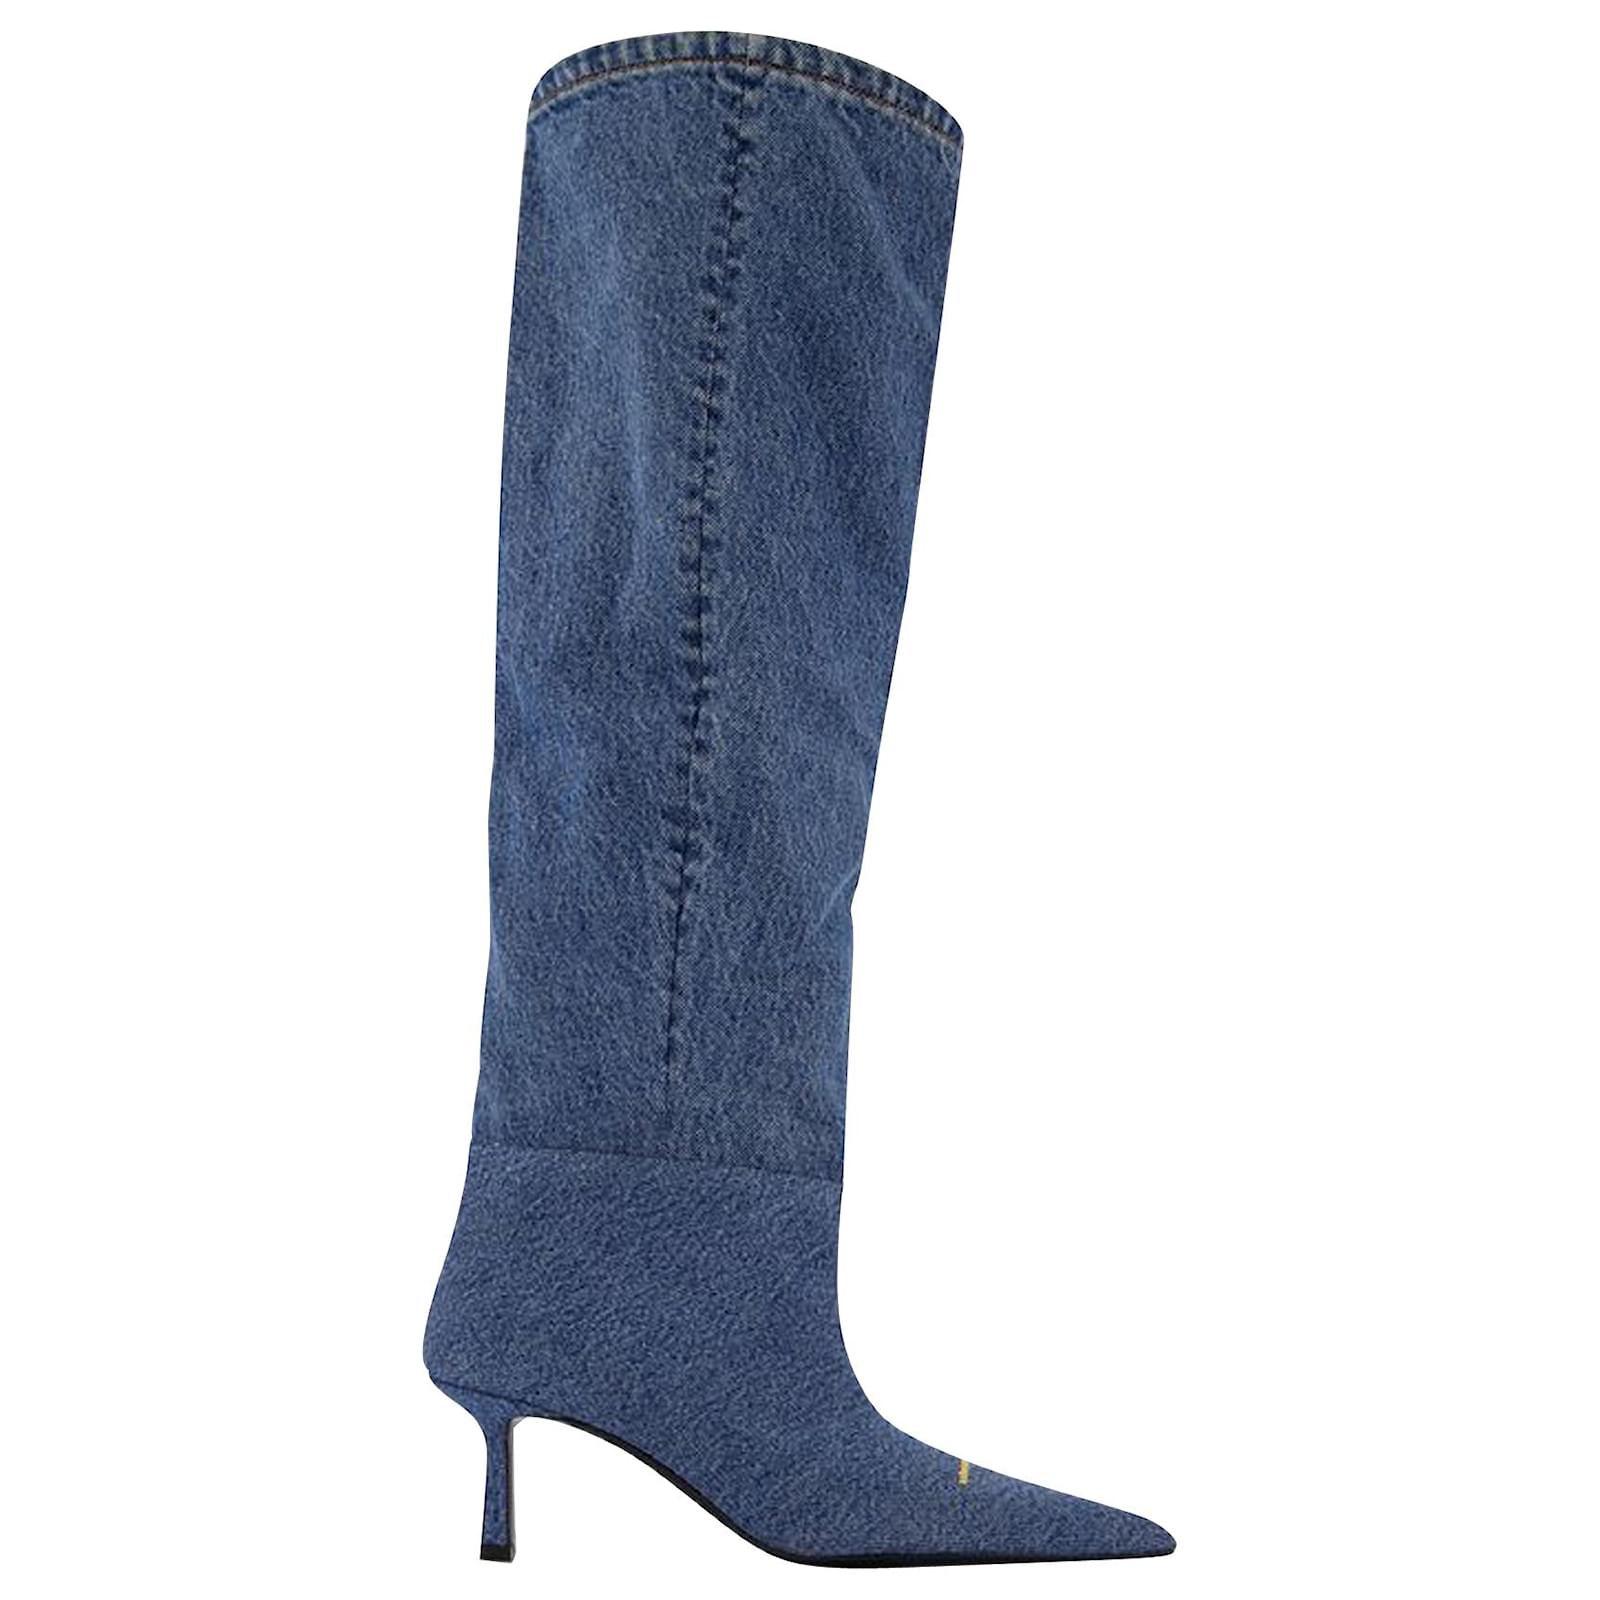 Alexander Wang Viola Slouch Boots in Capretto, purple Blue Leather ref ...